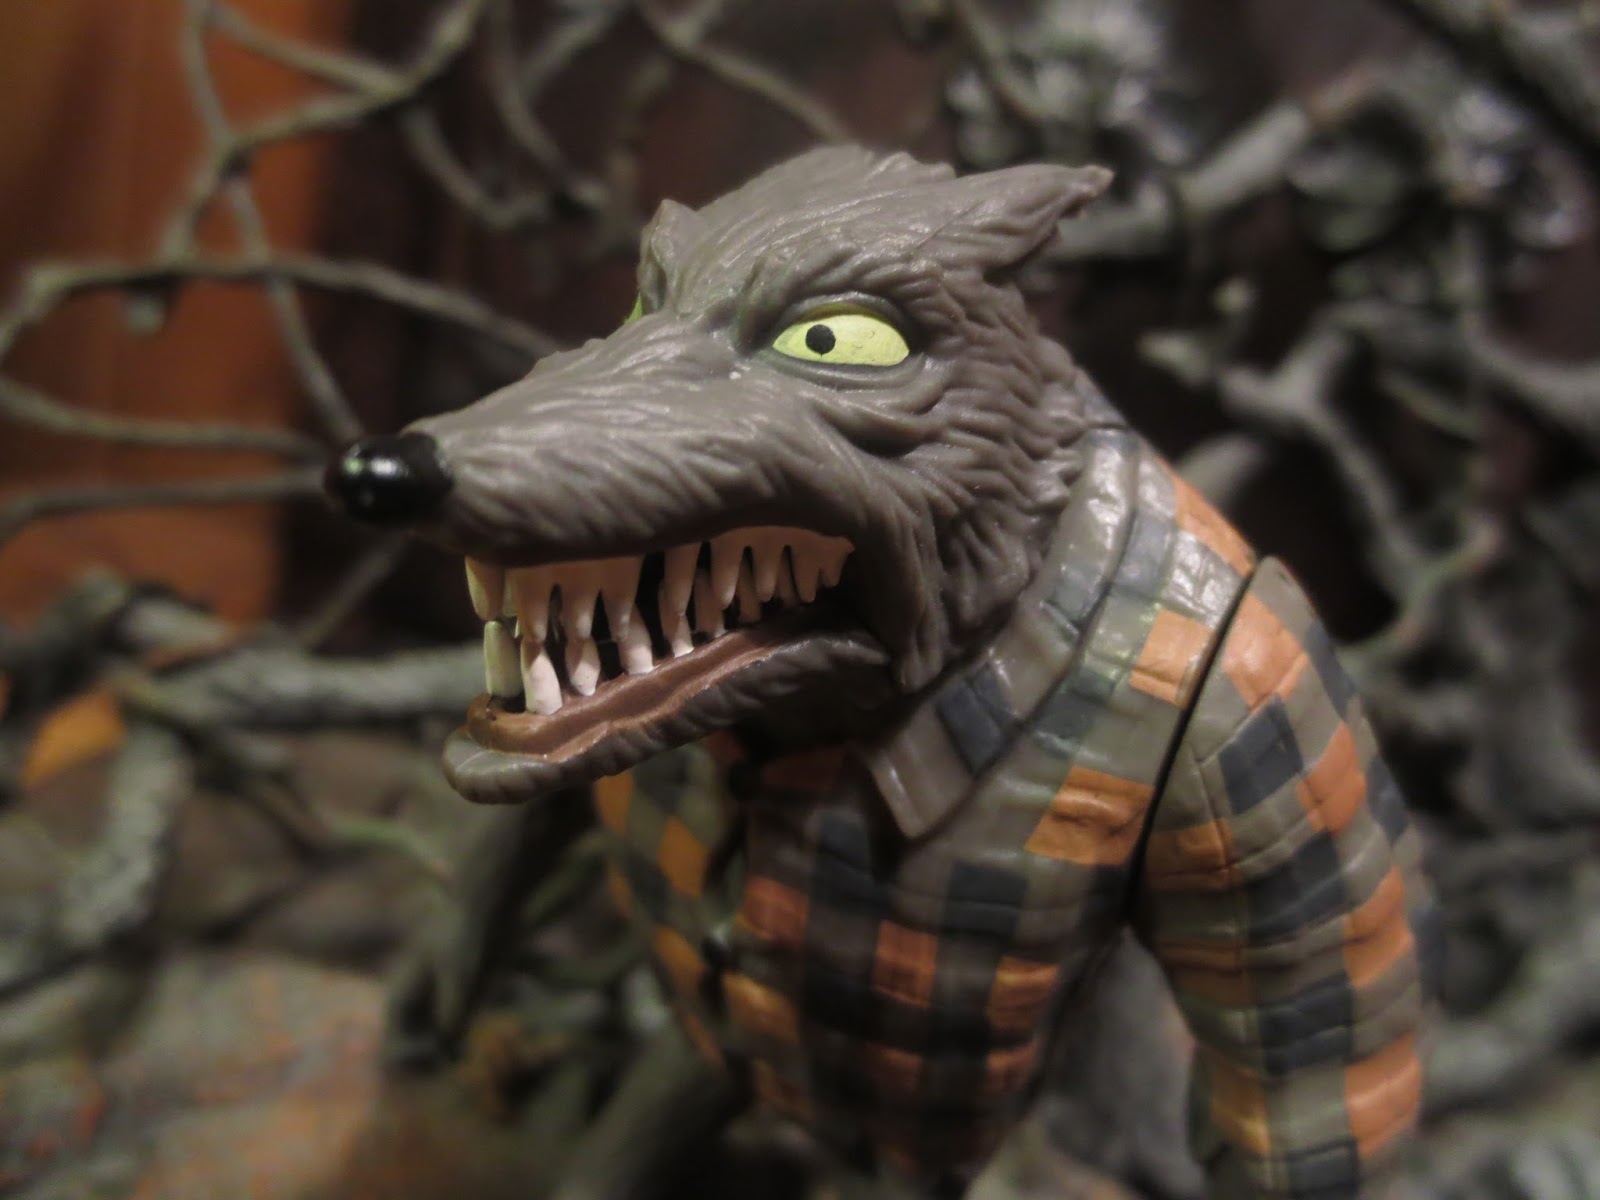 The Nightmare Before Christmas Reaction Wolfman Figure